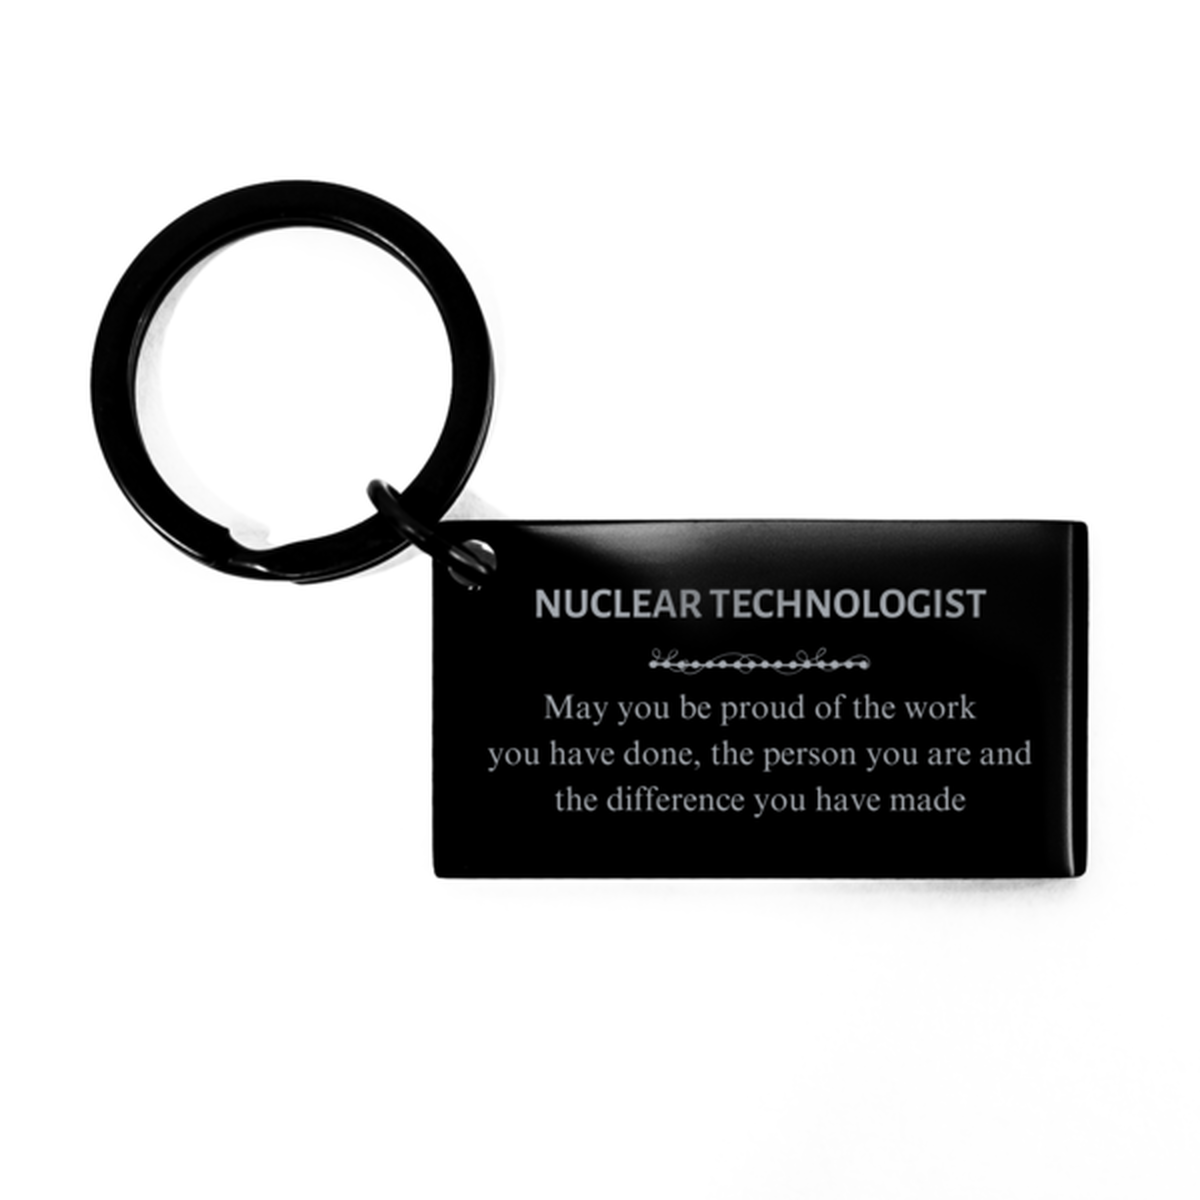 Personal Assistant May you be proud of the work you have done, Retirement Nuclear Technologist Keychain for Colleague Appreciation Gifts Amazing for Nuclear Technologist